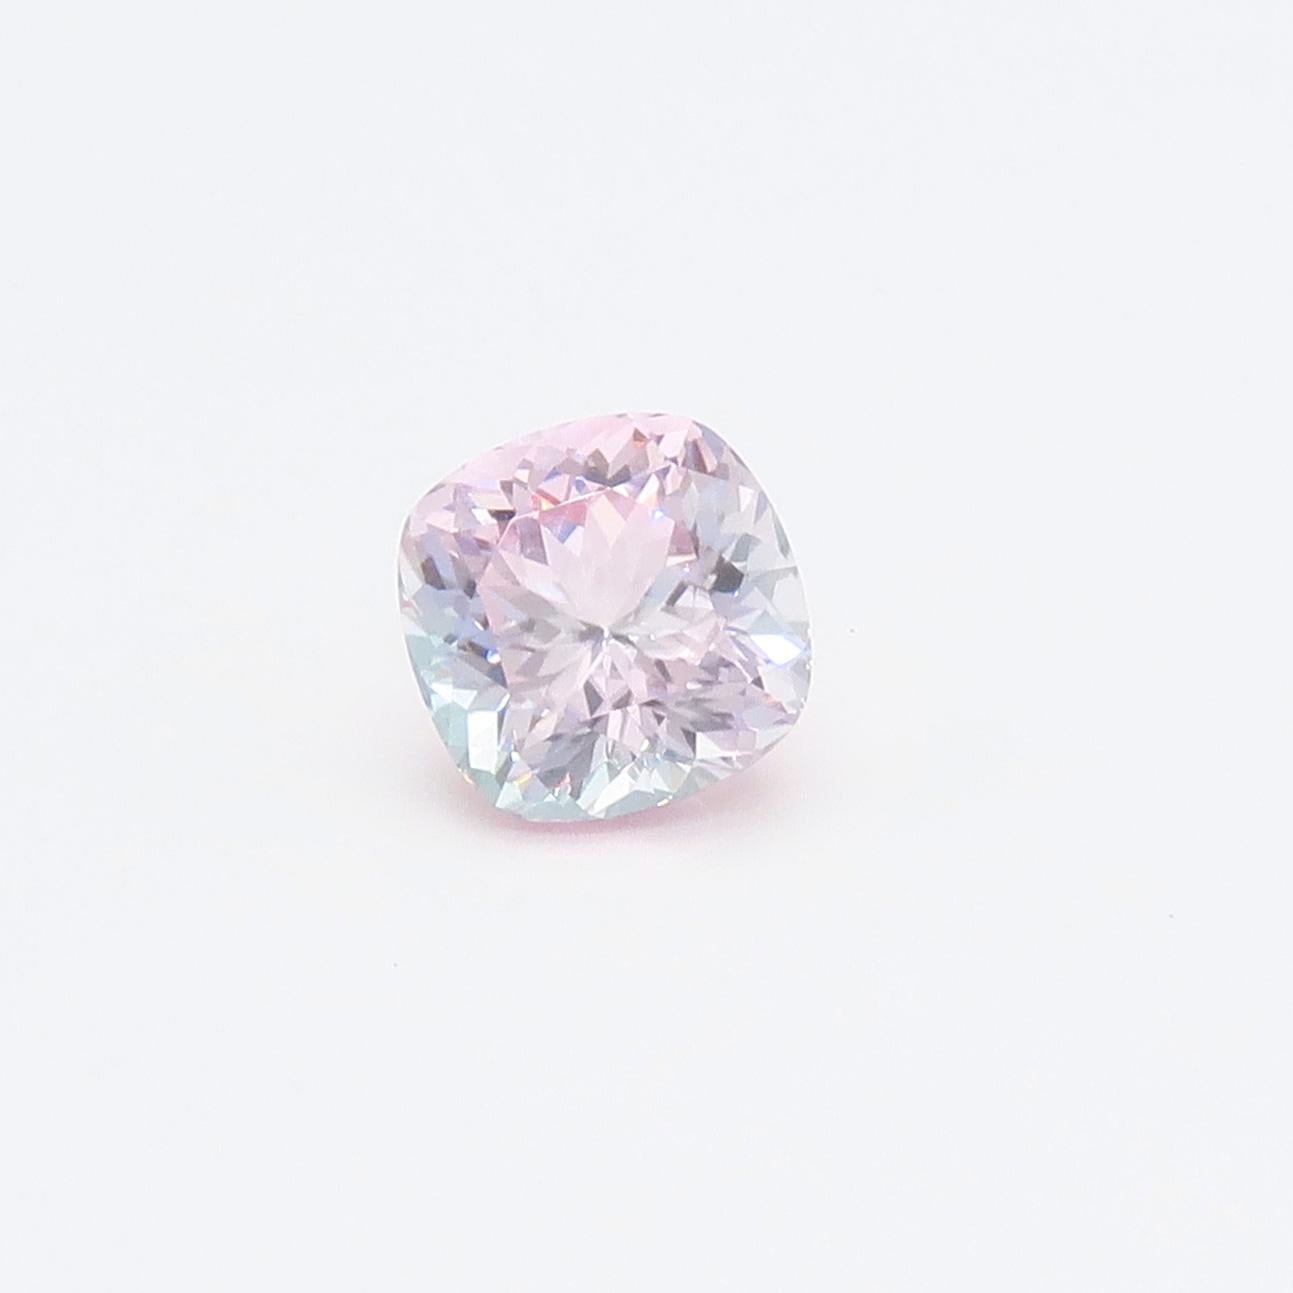 Cushion cut 6.17ct. pink tourmaline from Afghanistan. Bi-color pink with white that shows at the edges of the stone when it is rotated. Photographs can not capture the actual brilliance of this gemstone. 

1 Cushion cut tourmaline, approx. total